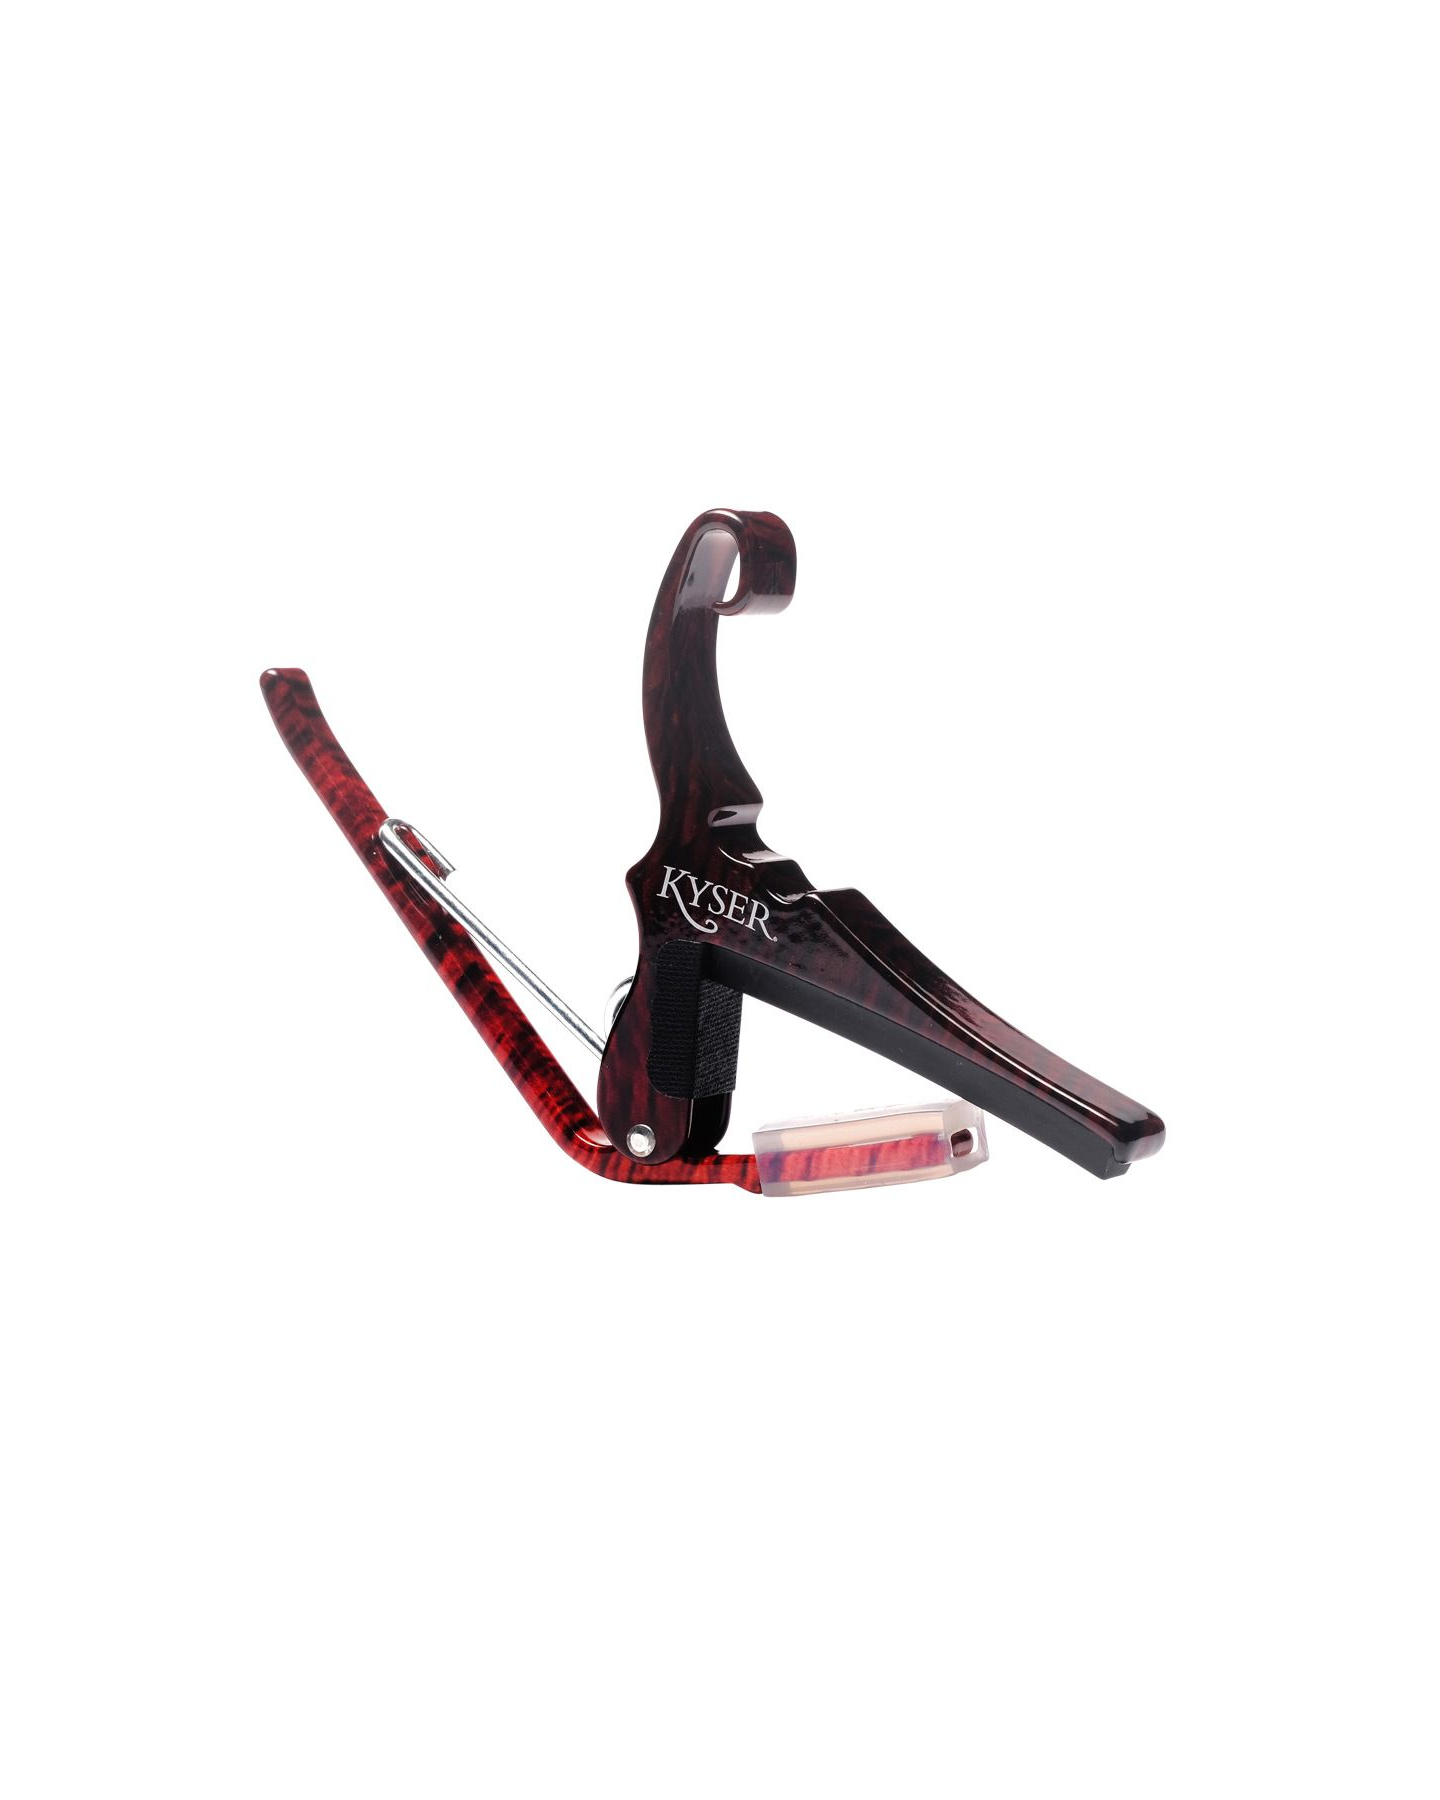 Kyser Quick-Change Capo for 6-String Guitars, Rosewood